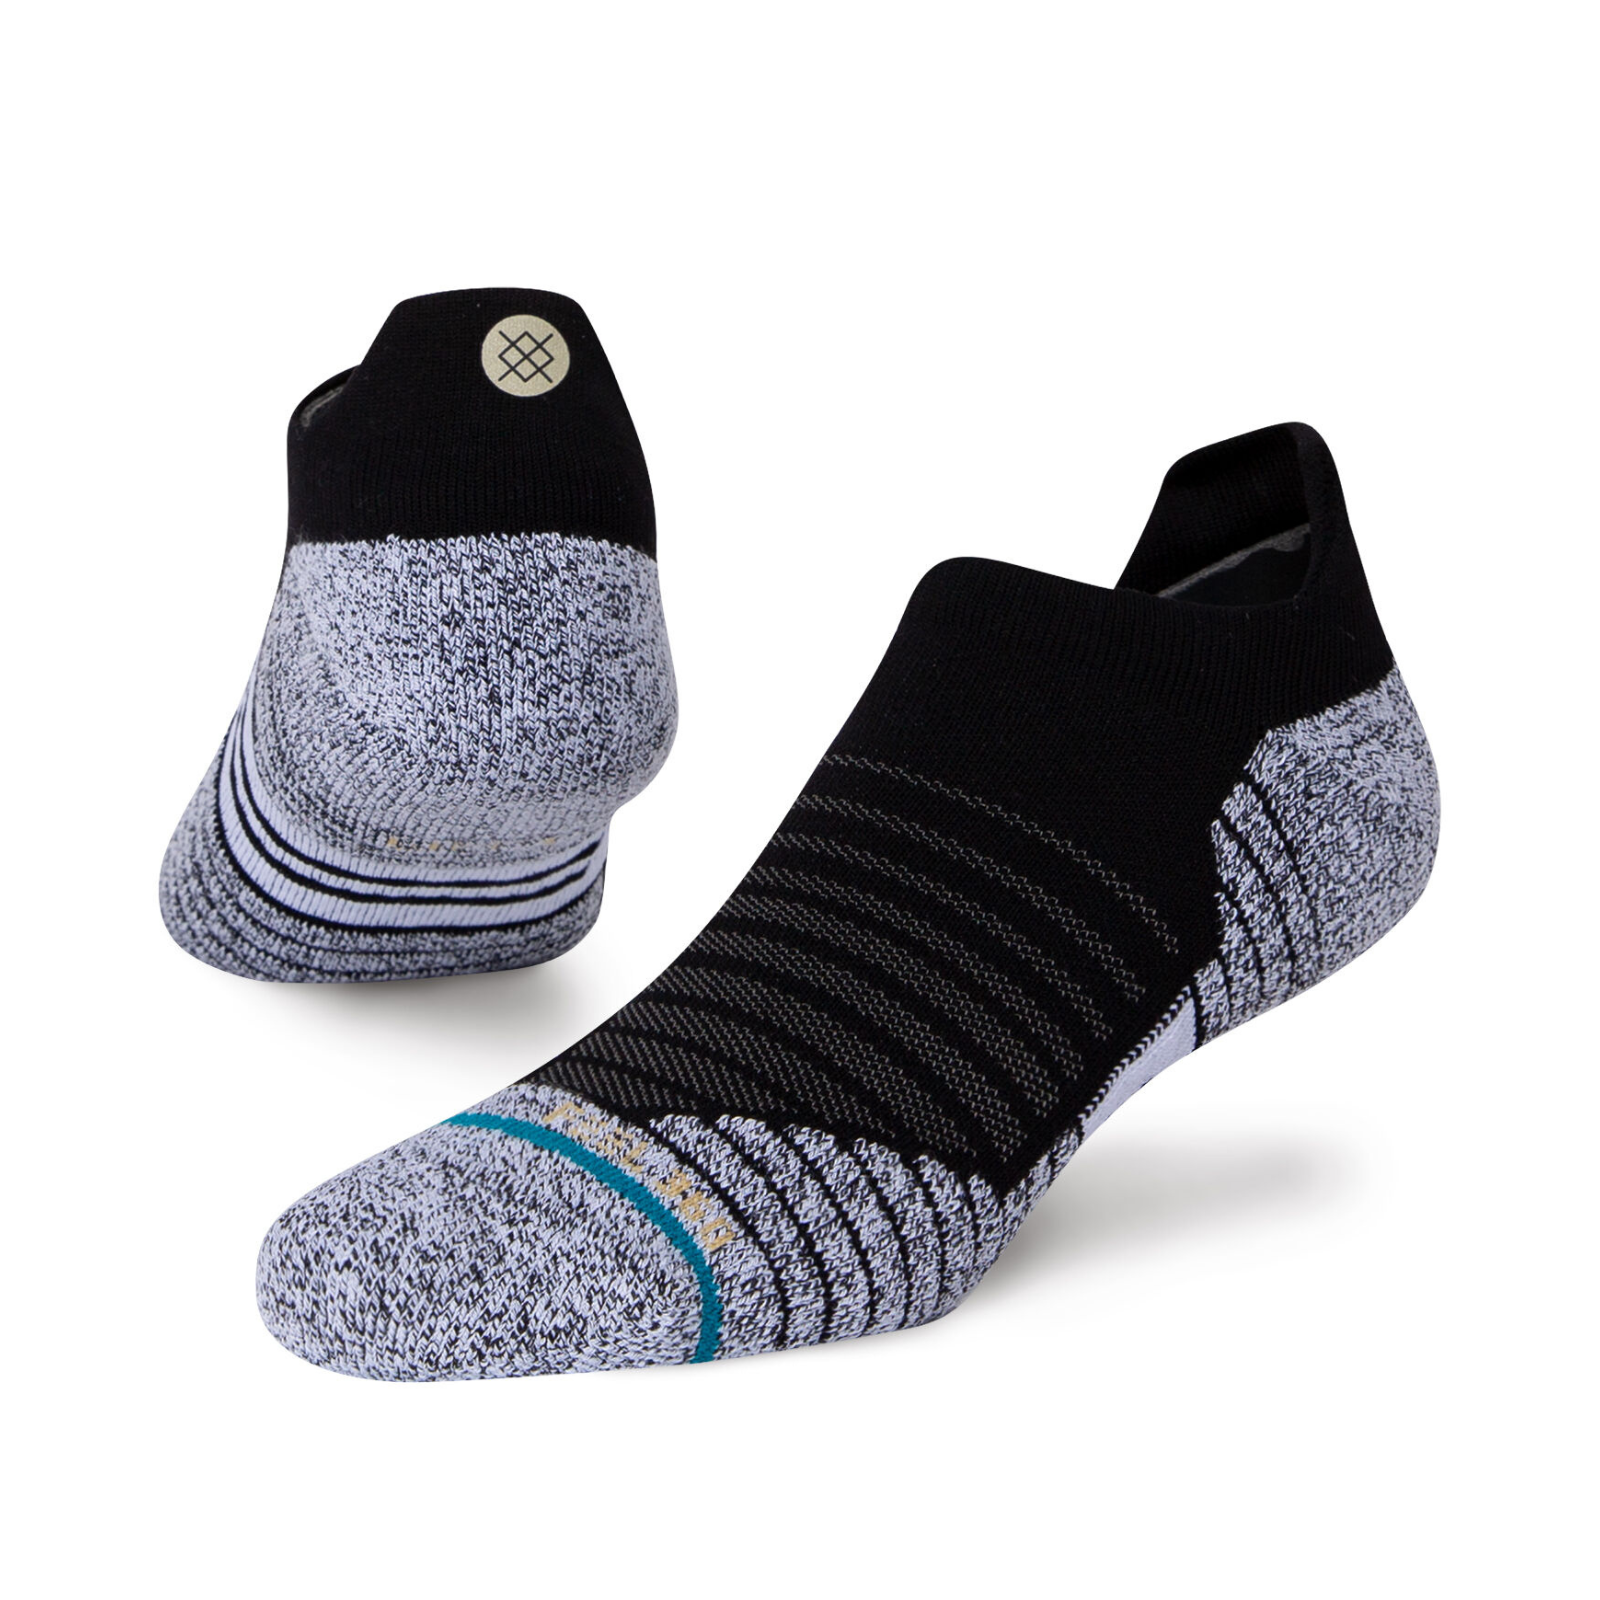 Stance Versa Tab women's and men's sock featuring black no-show sock with gray bottom. Shown on display feet from side and back. 